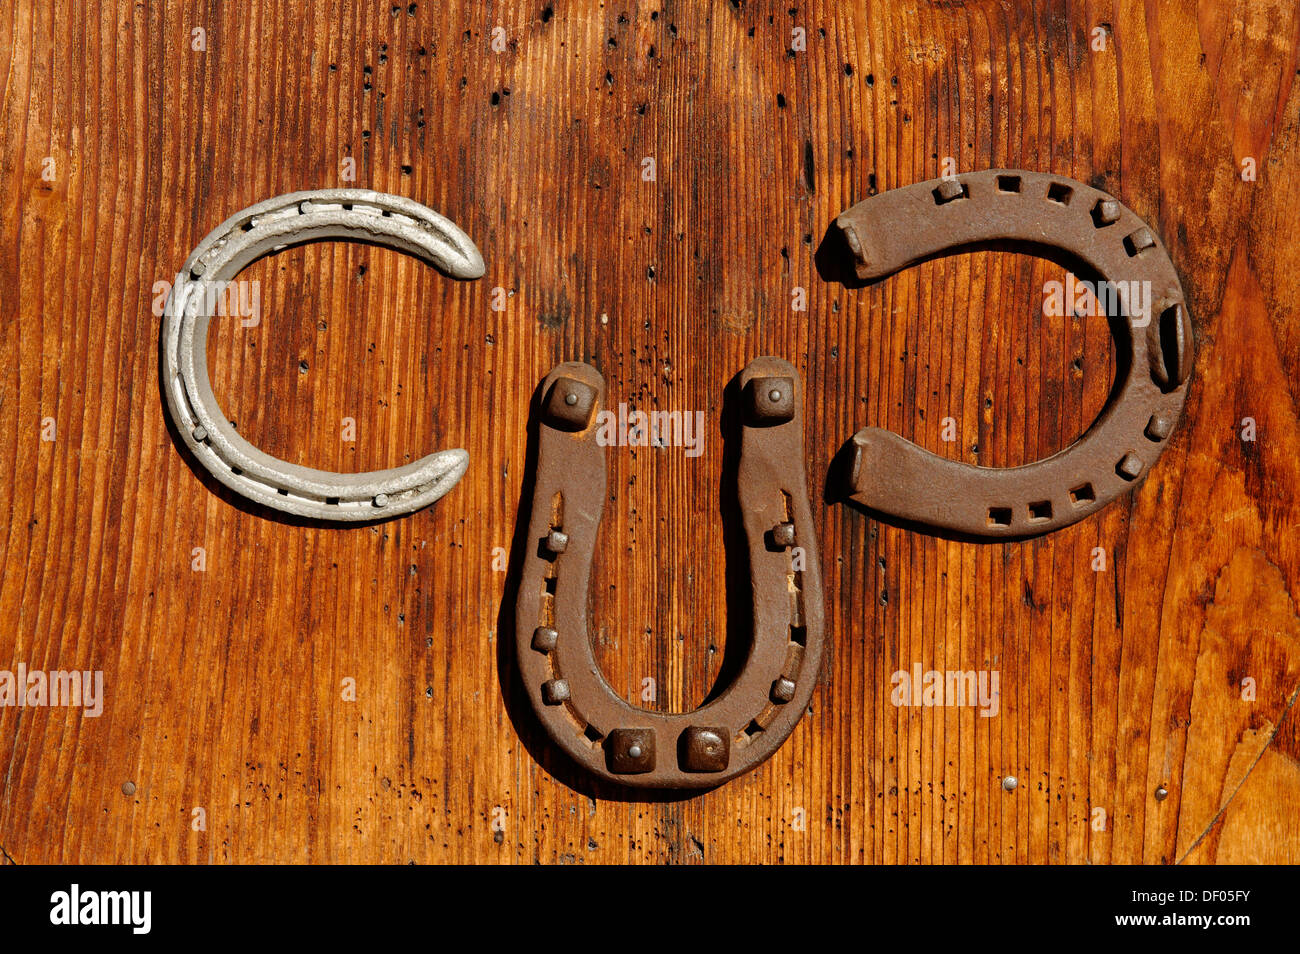 https://c8.alamy.com/comp/DF05FY/three-horseshoes-attached-to-the-door-to-the-elmauer-hut-near-mittenwald-DF05FY.jpg